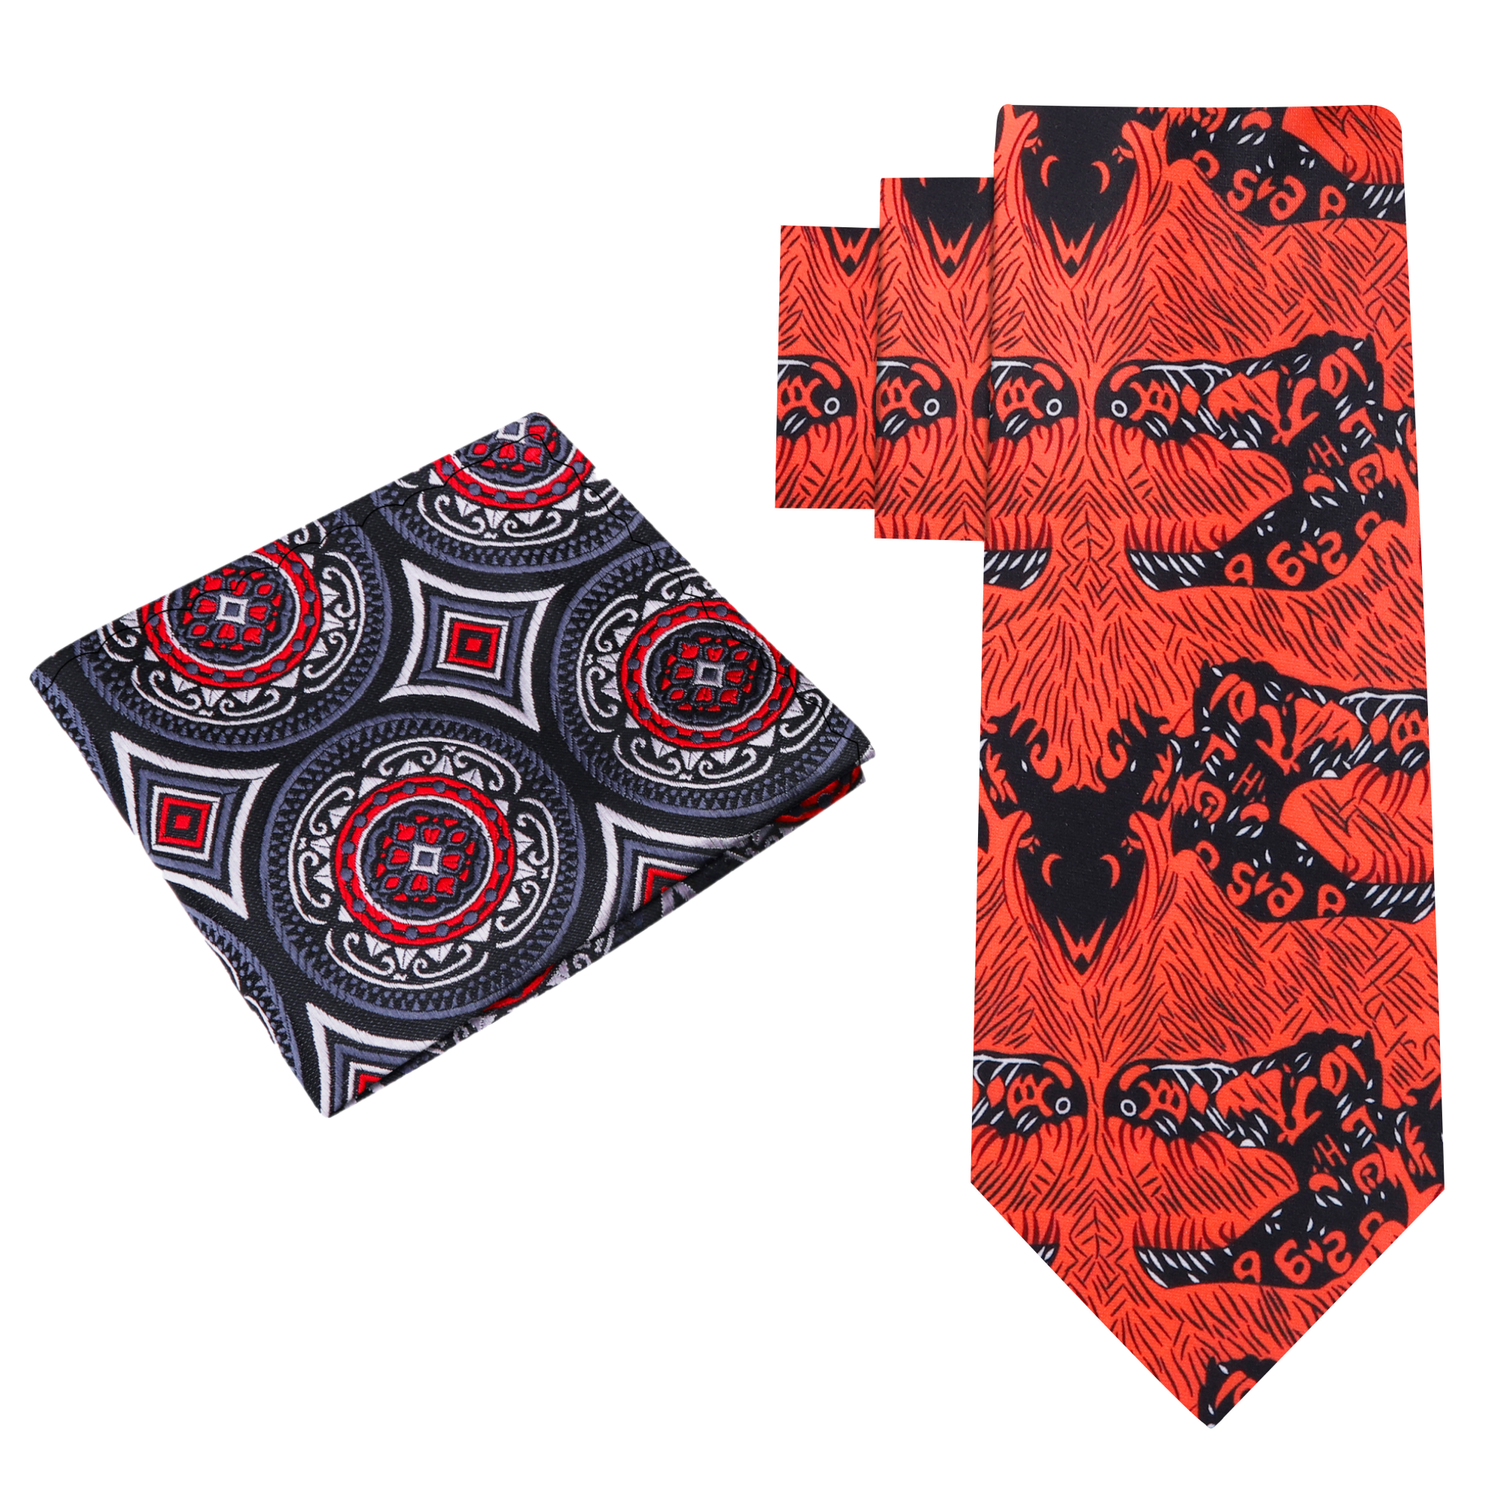 Alt View: Red, Black Abstract Necktie and Abstract Square